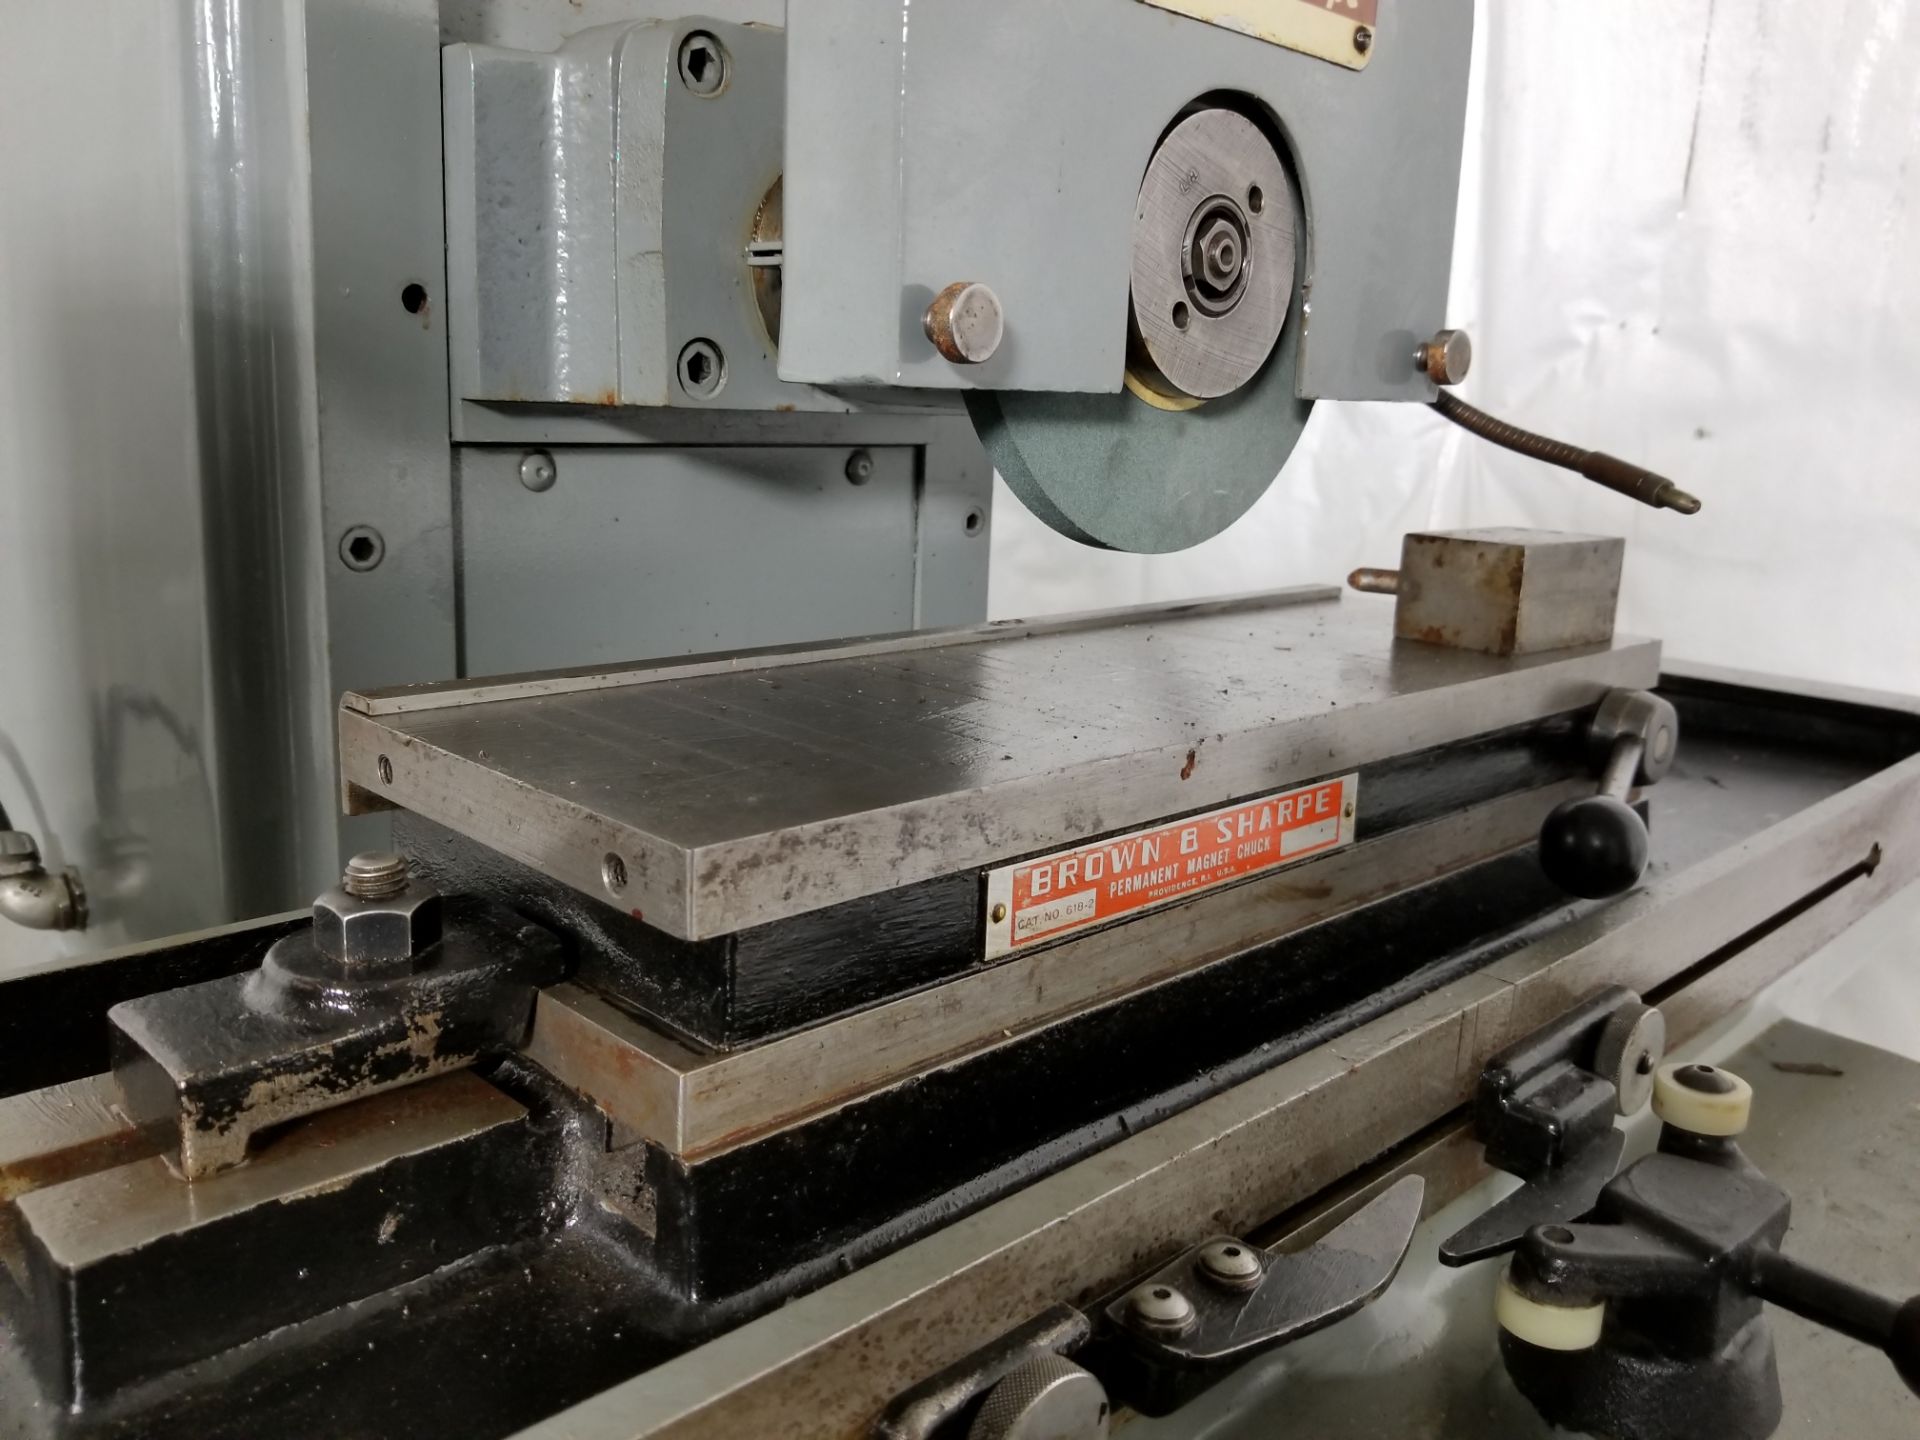 1966 BROWN & SHARPE MICROMASTER HYDRAULIC SURFACE GRINDER, MODEL 618, B&S PERMANENT MAGNETIC - Image 5 of 5